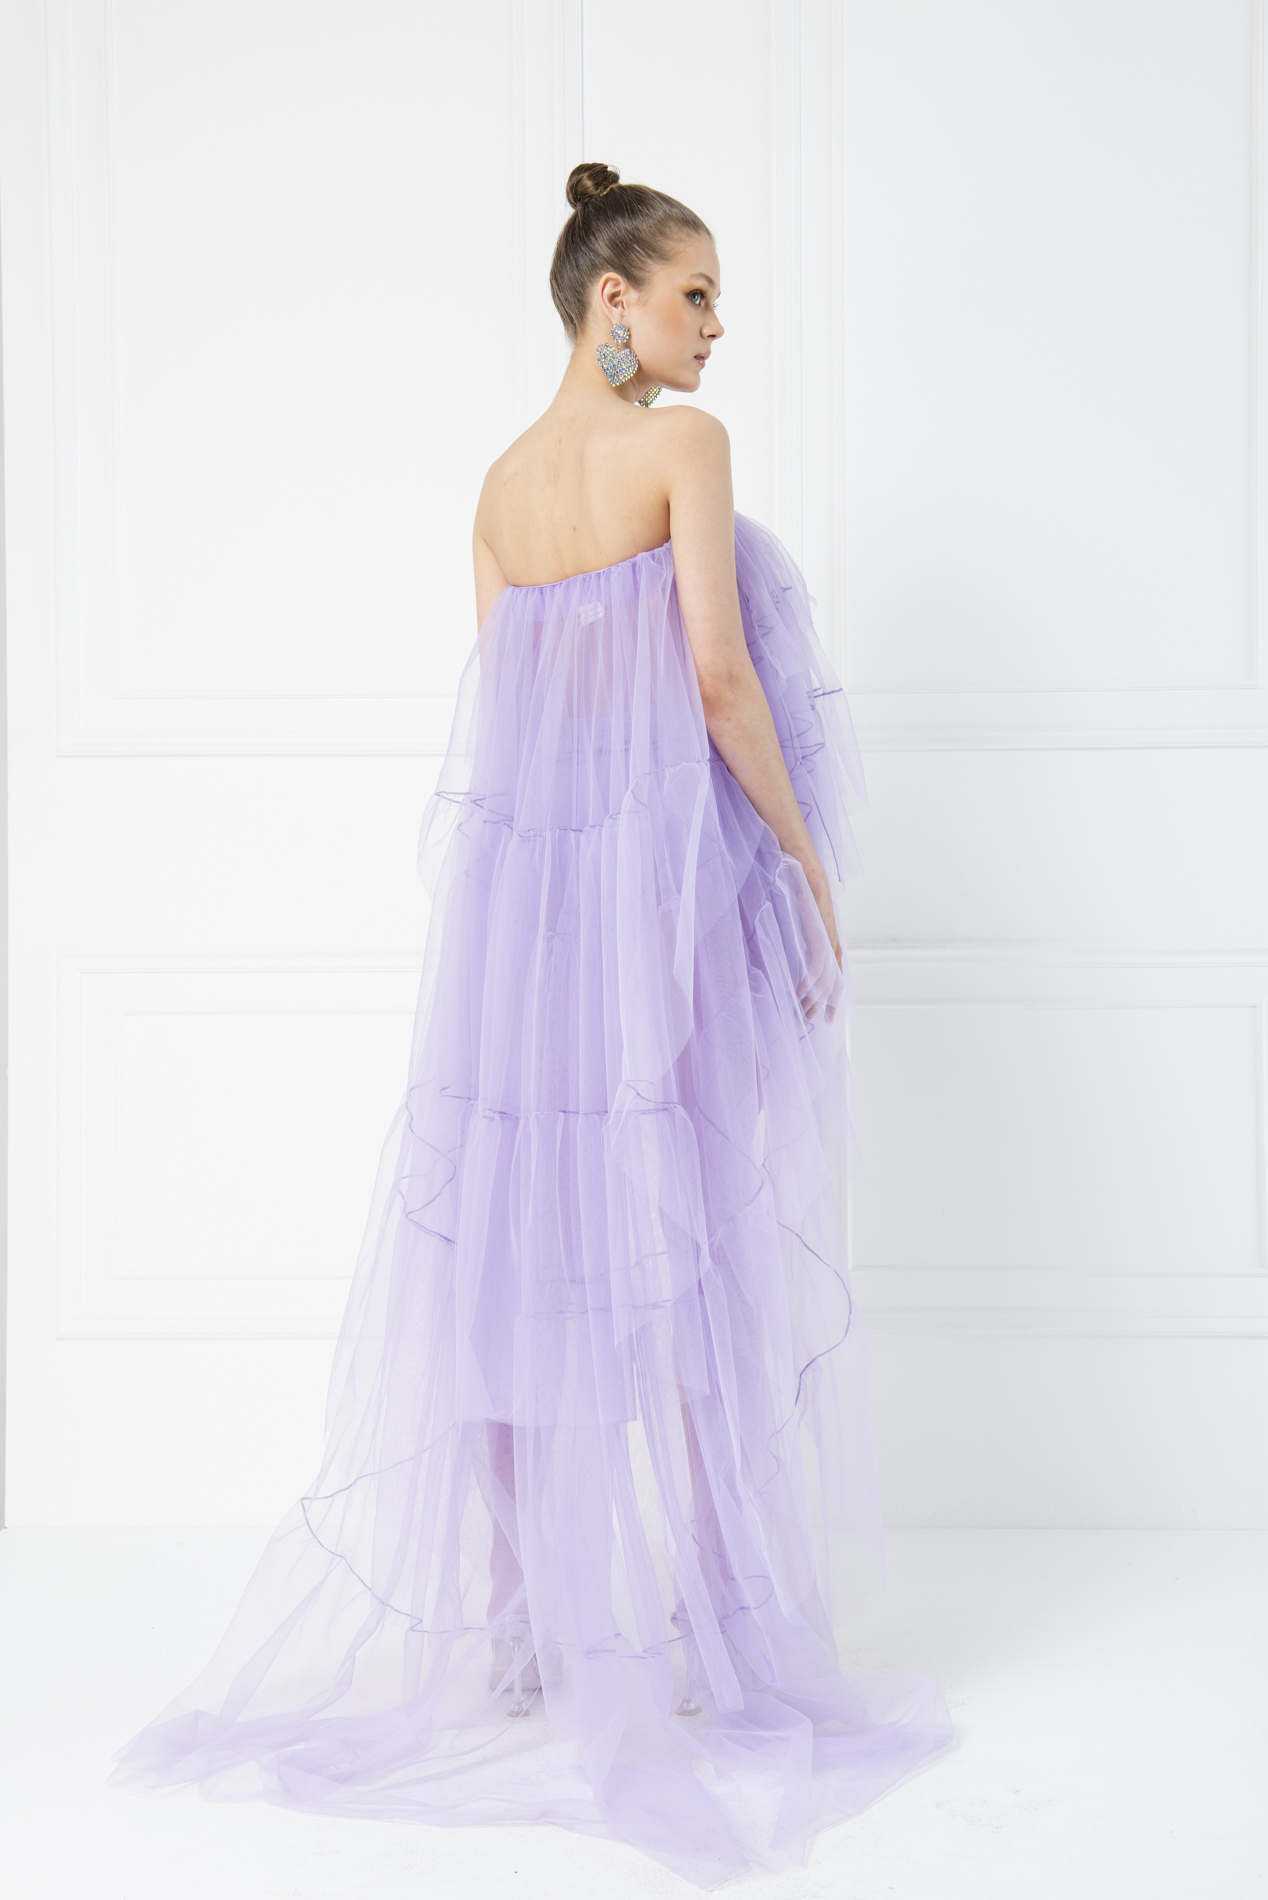 Wholesale Tulle Detail Strapless Lilac Sheer Mini Dress